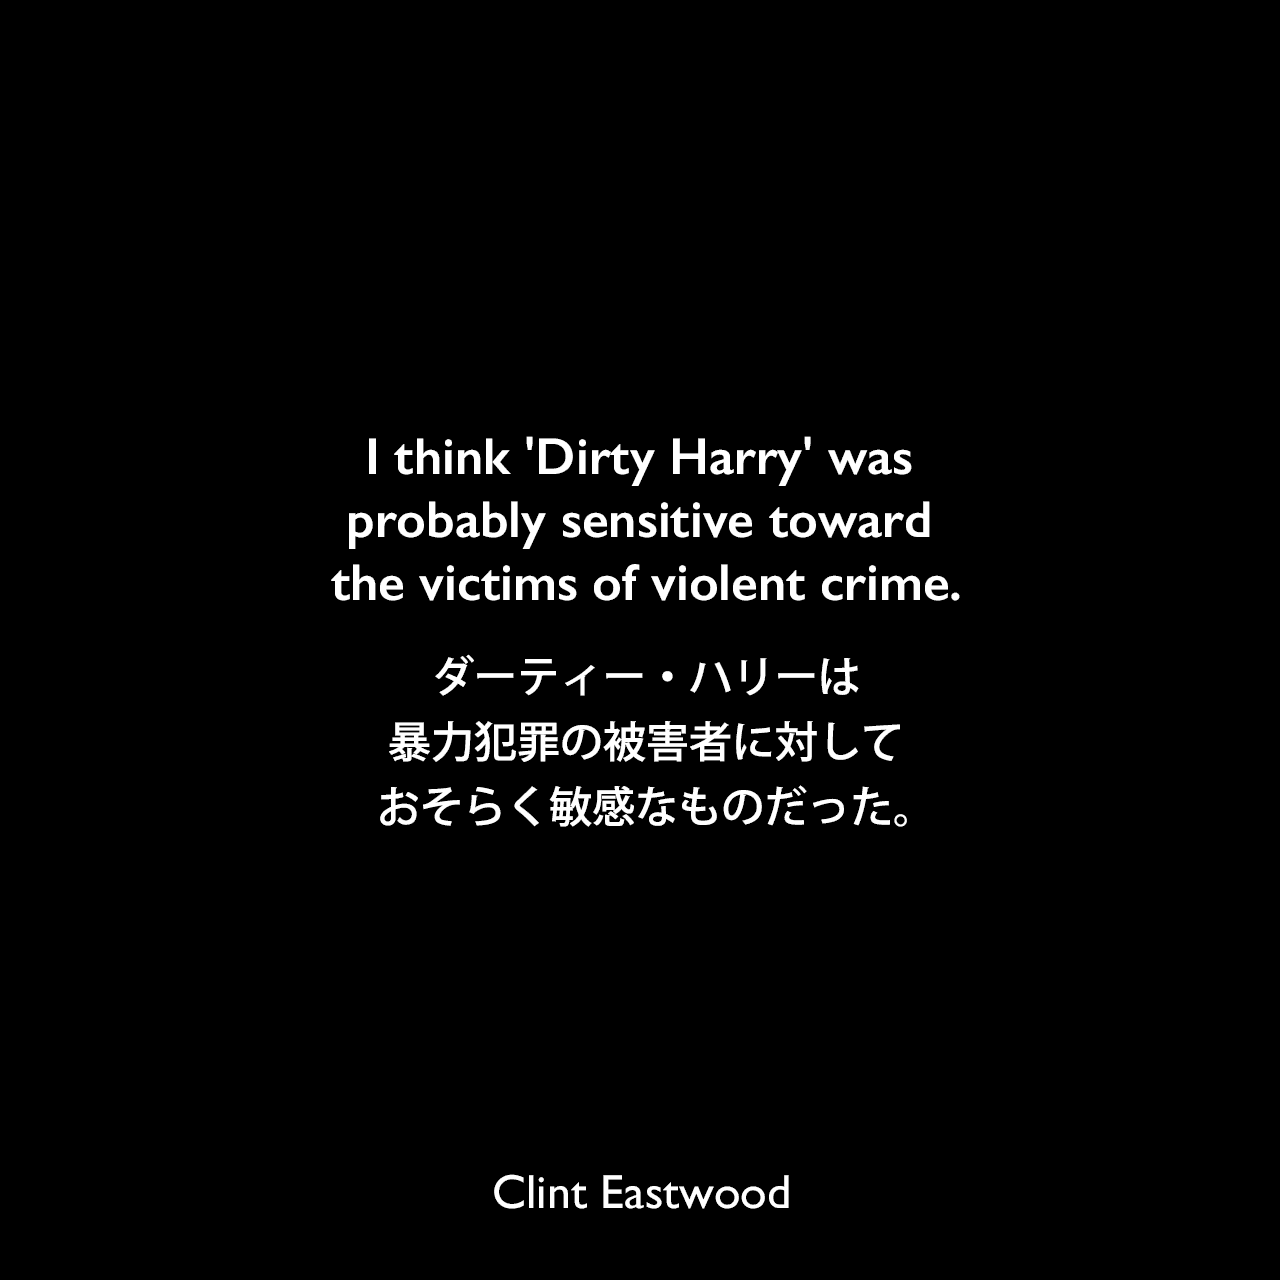 I think 'Dirty Harry' was probably sensitive toward the victims of violent crime.ダーティー・ハリーは暴力犯罪の被害者に対しておそらく敏感なものだった。Clint Eastwood